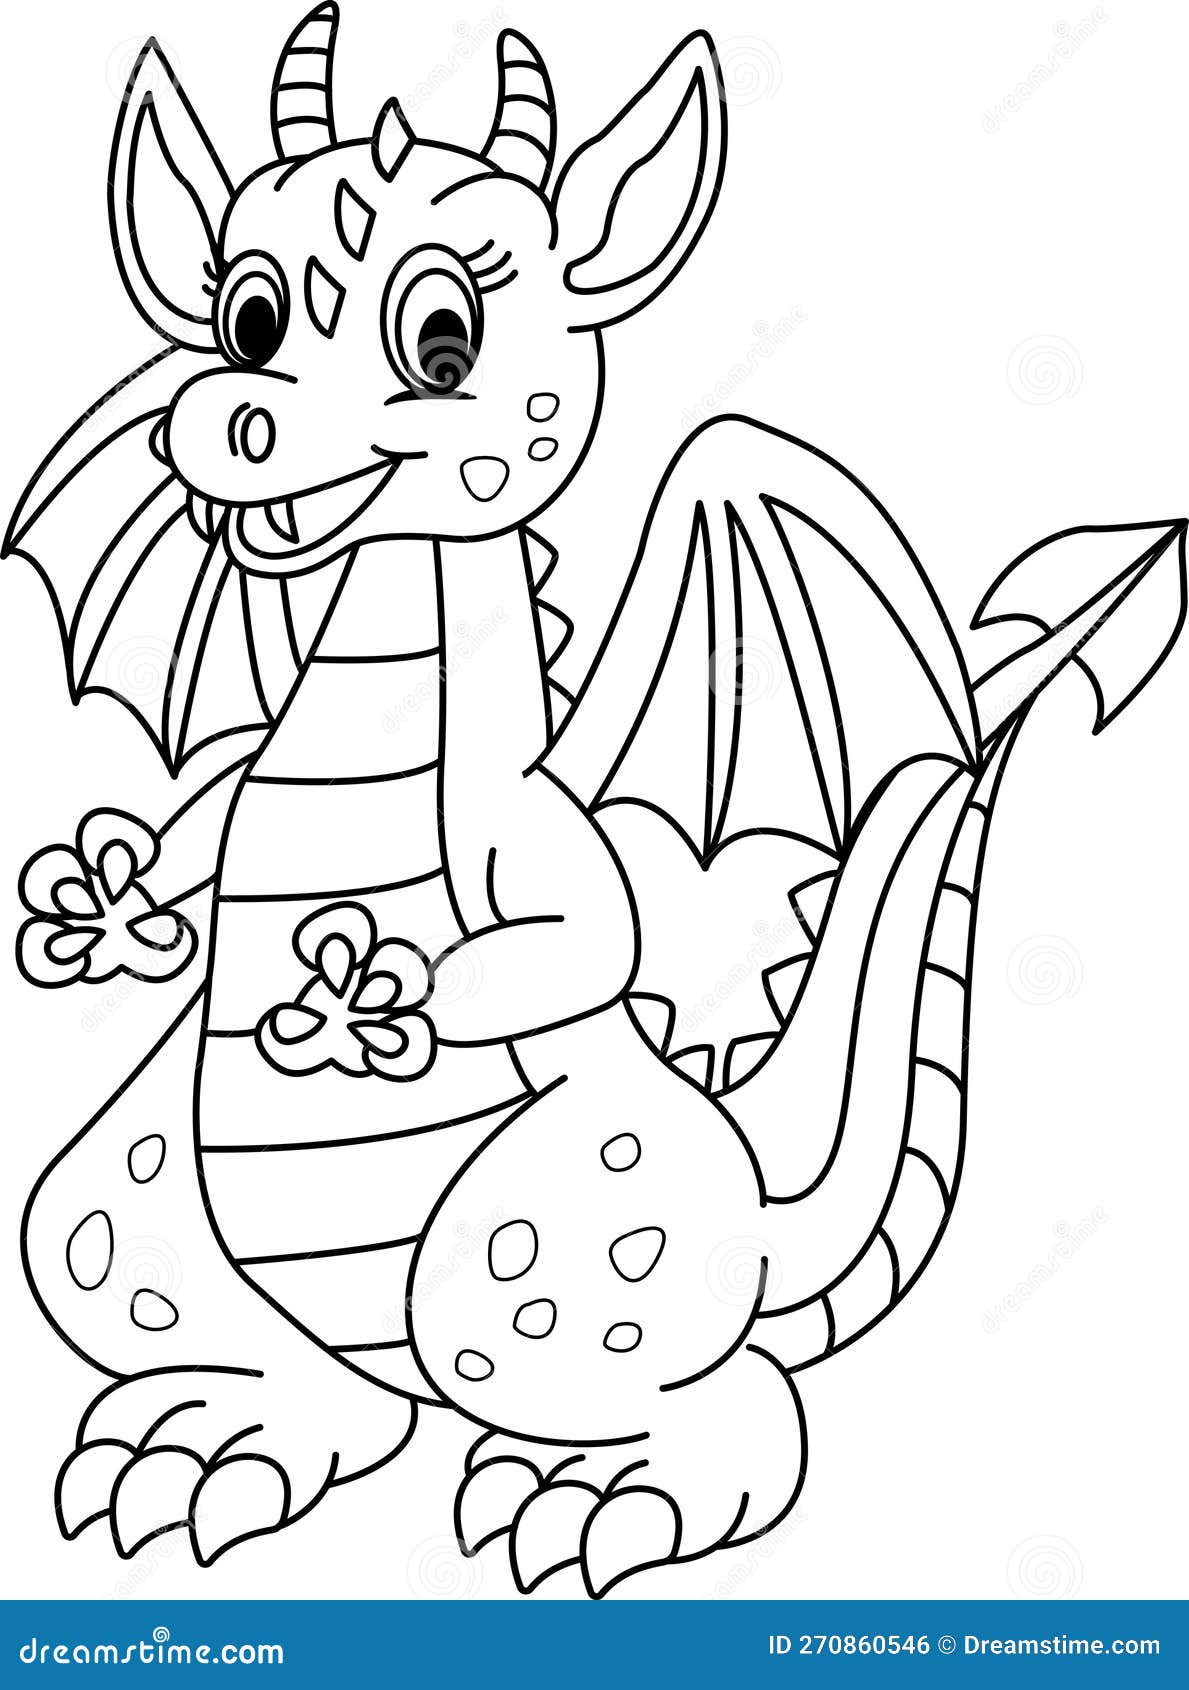 Cute Cartoon Dragon for Coloring Page. Stock Vector - Illustration of ...